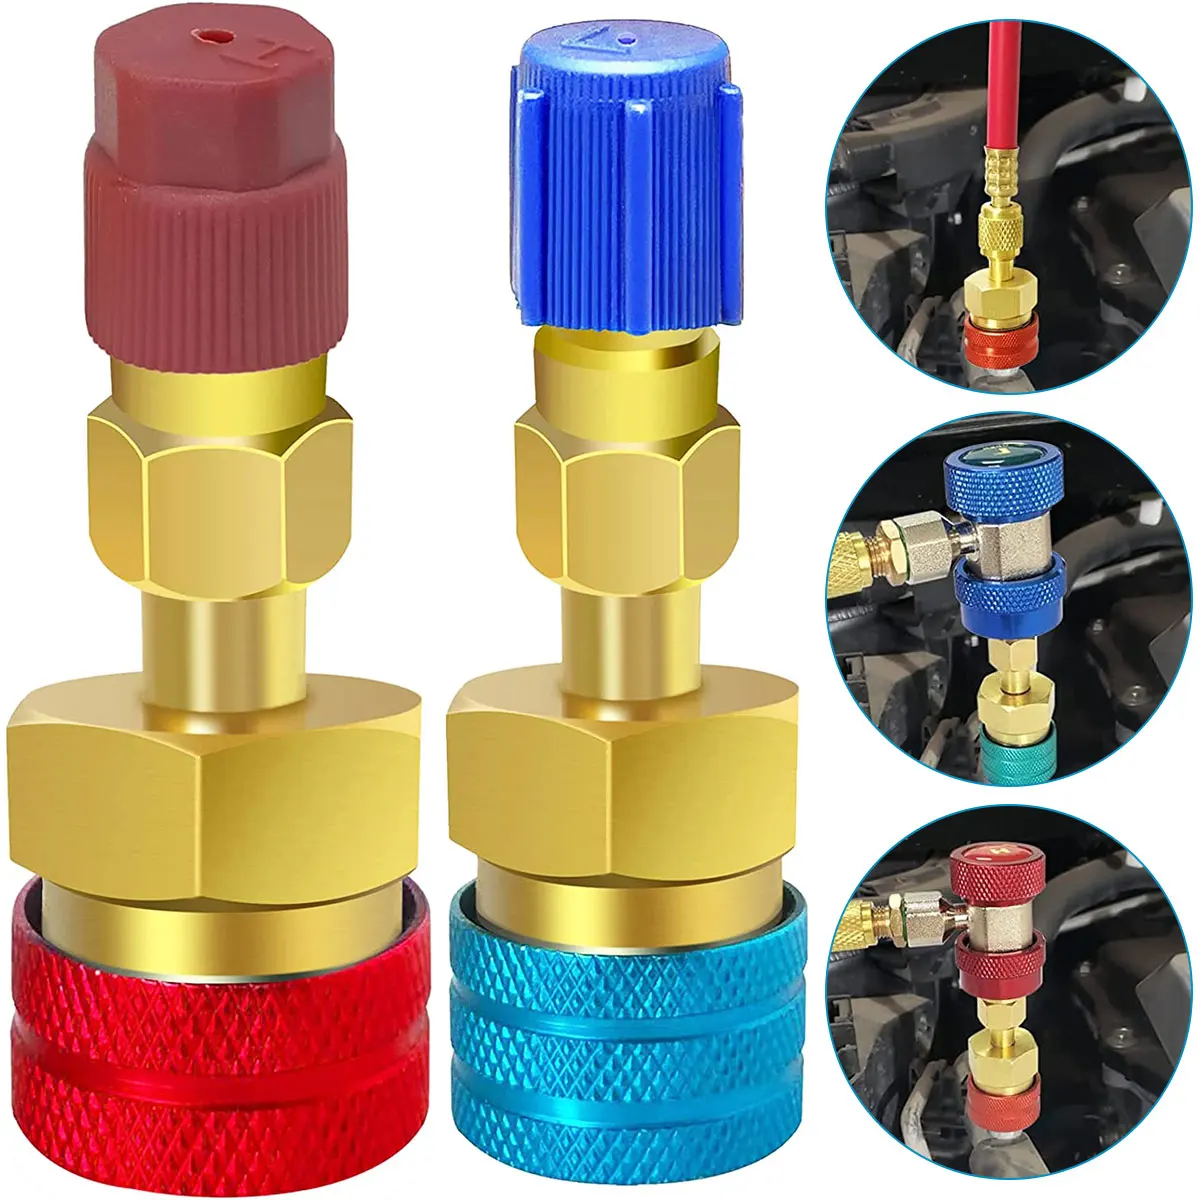 2pcs R1234YF to R134A High and Low Side Quick Coupler R12 to R134A Adapter Fitting Connector Car Air-conditioning Fitting Tools